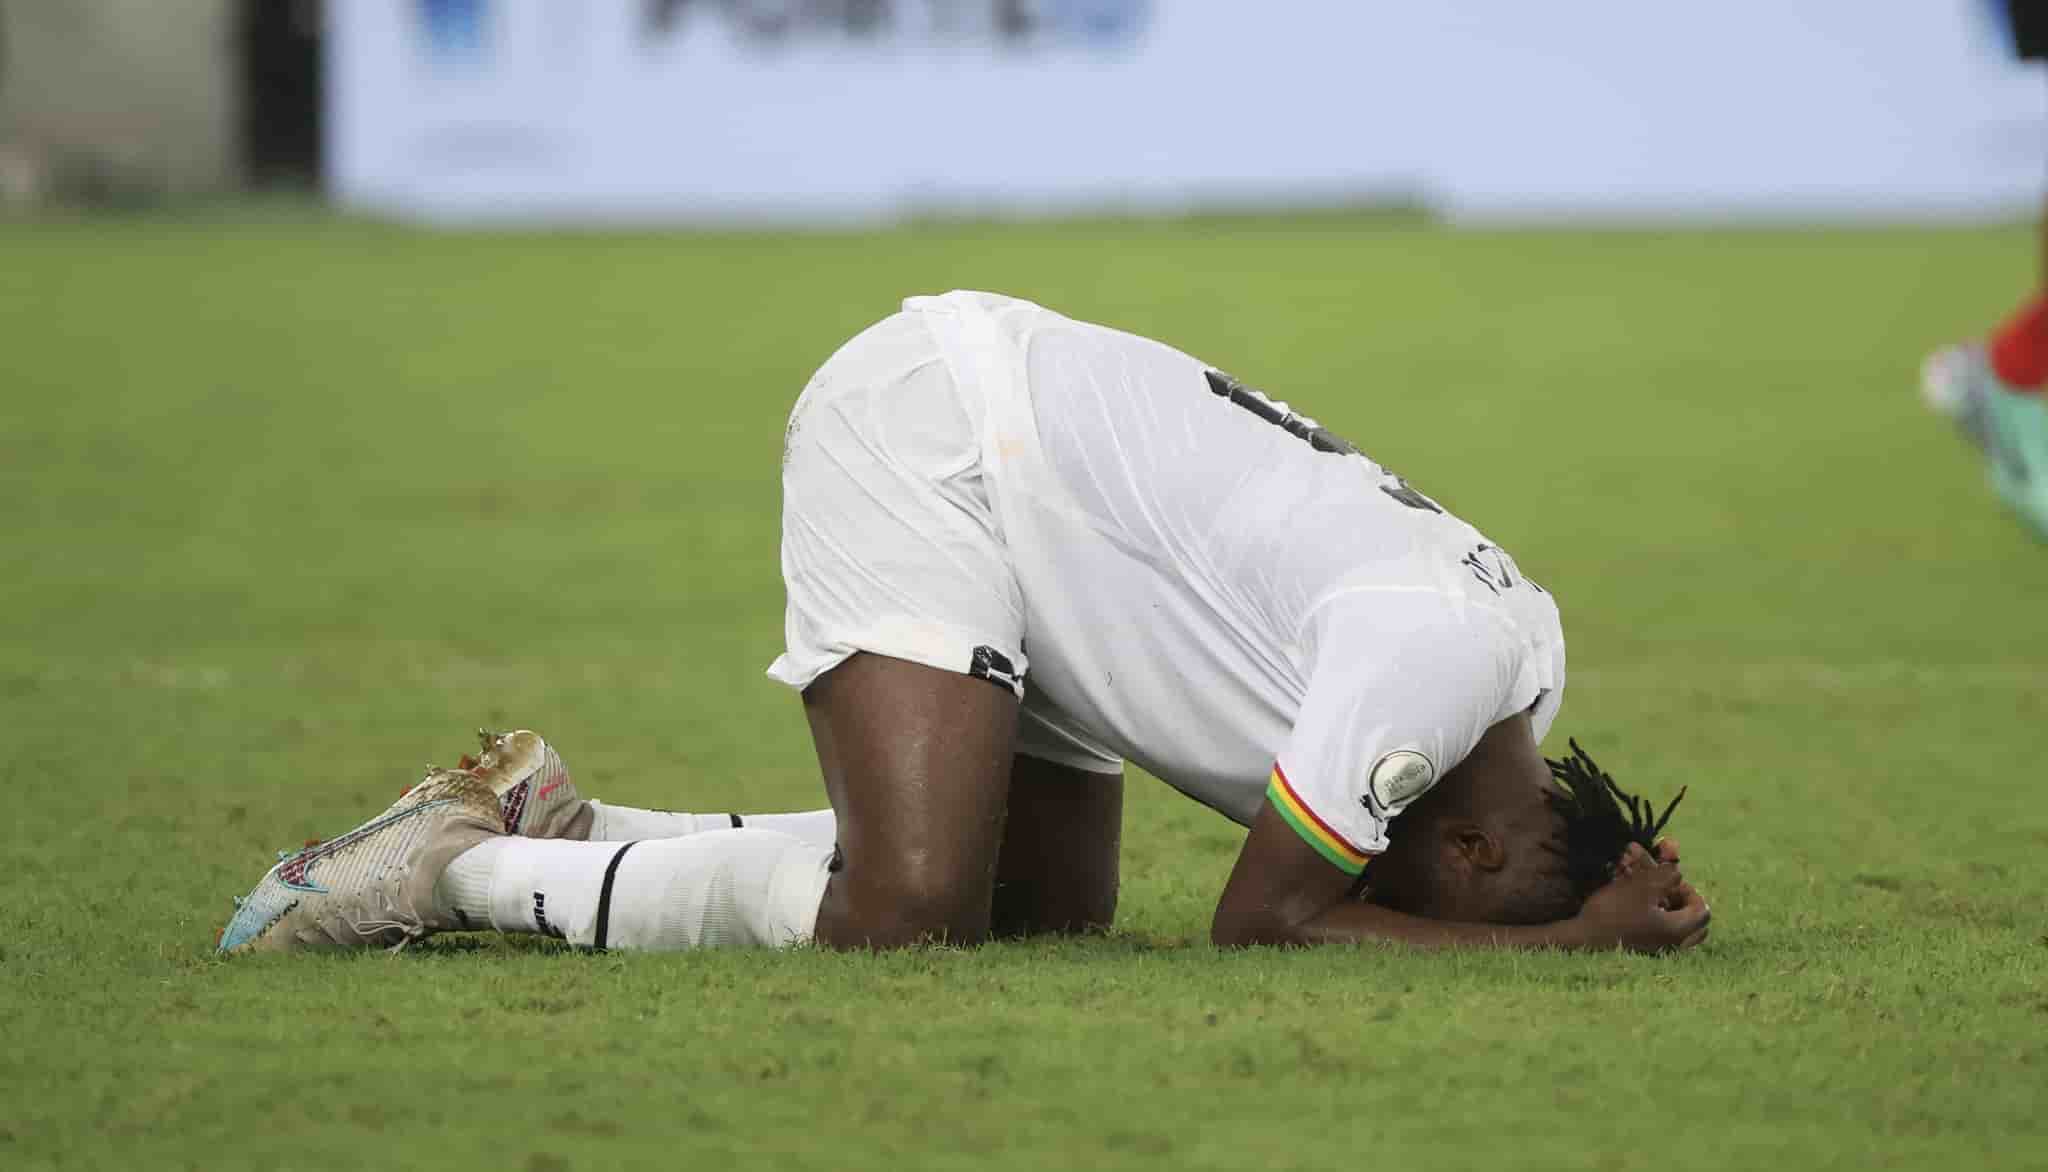 Ghana let slip a two-goal lead in stoppage time, settling for a 2-2 draw against Mozambique in their final group stage match of the 2023 Africa Cup of Nations (AFCON).